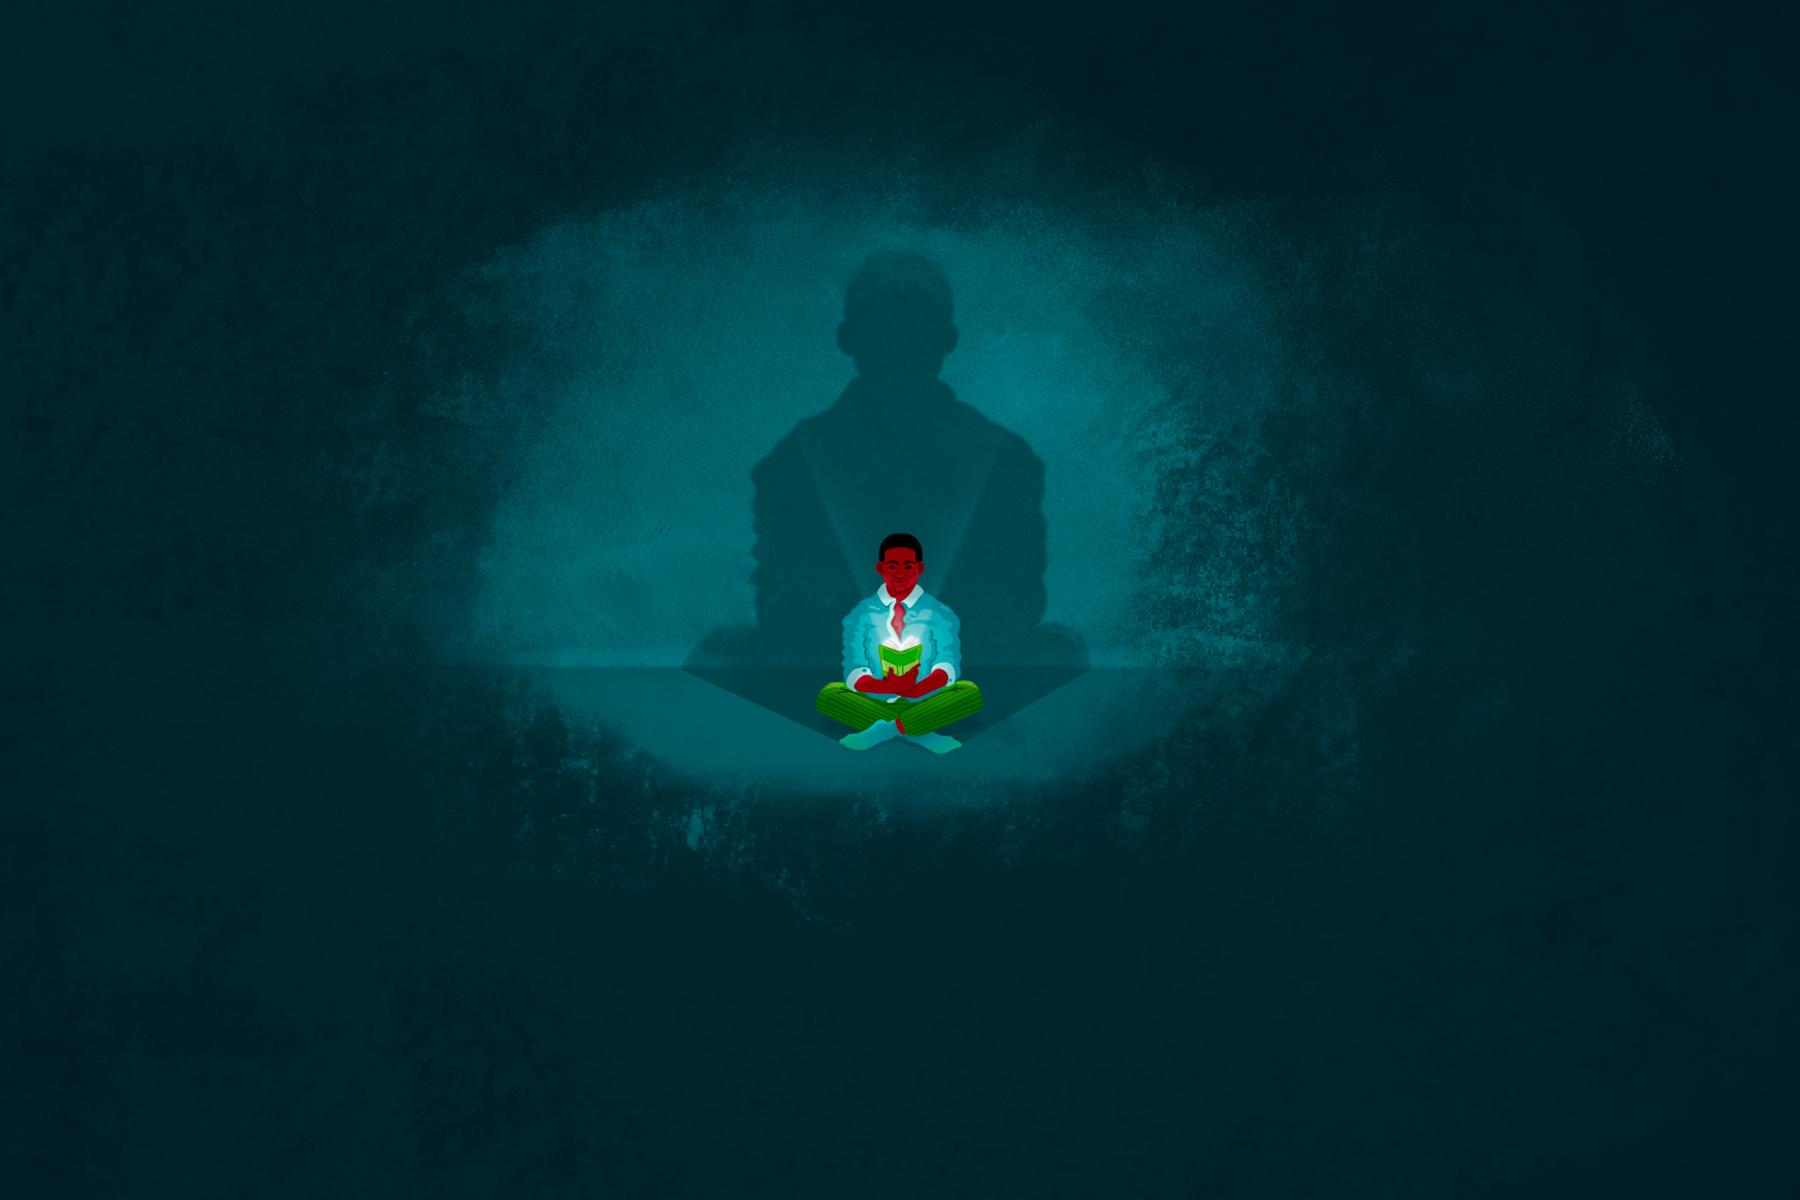 An illustration of a person, small against a big, dark teal background, with an open book casting light upwards on their face.